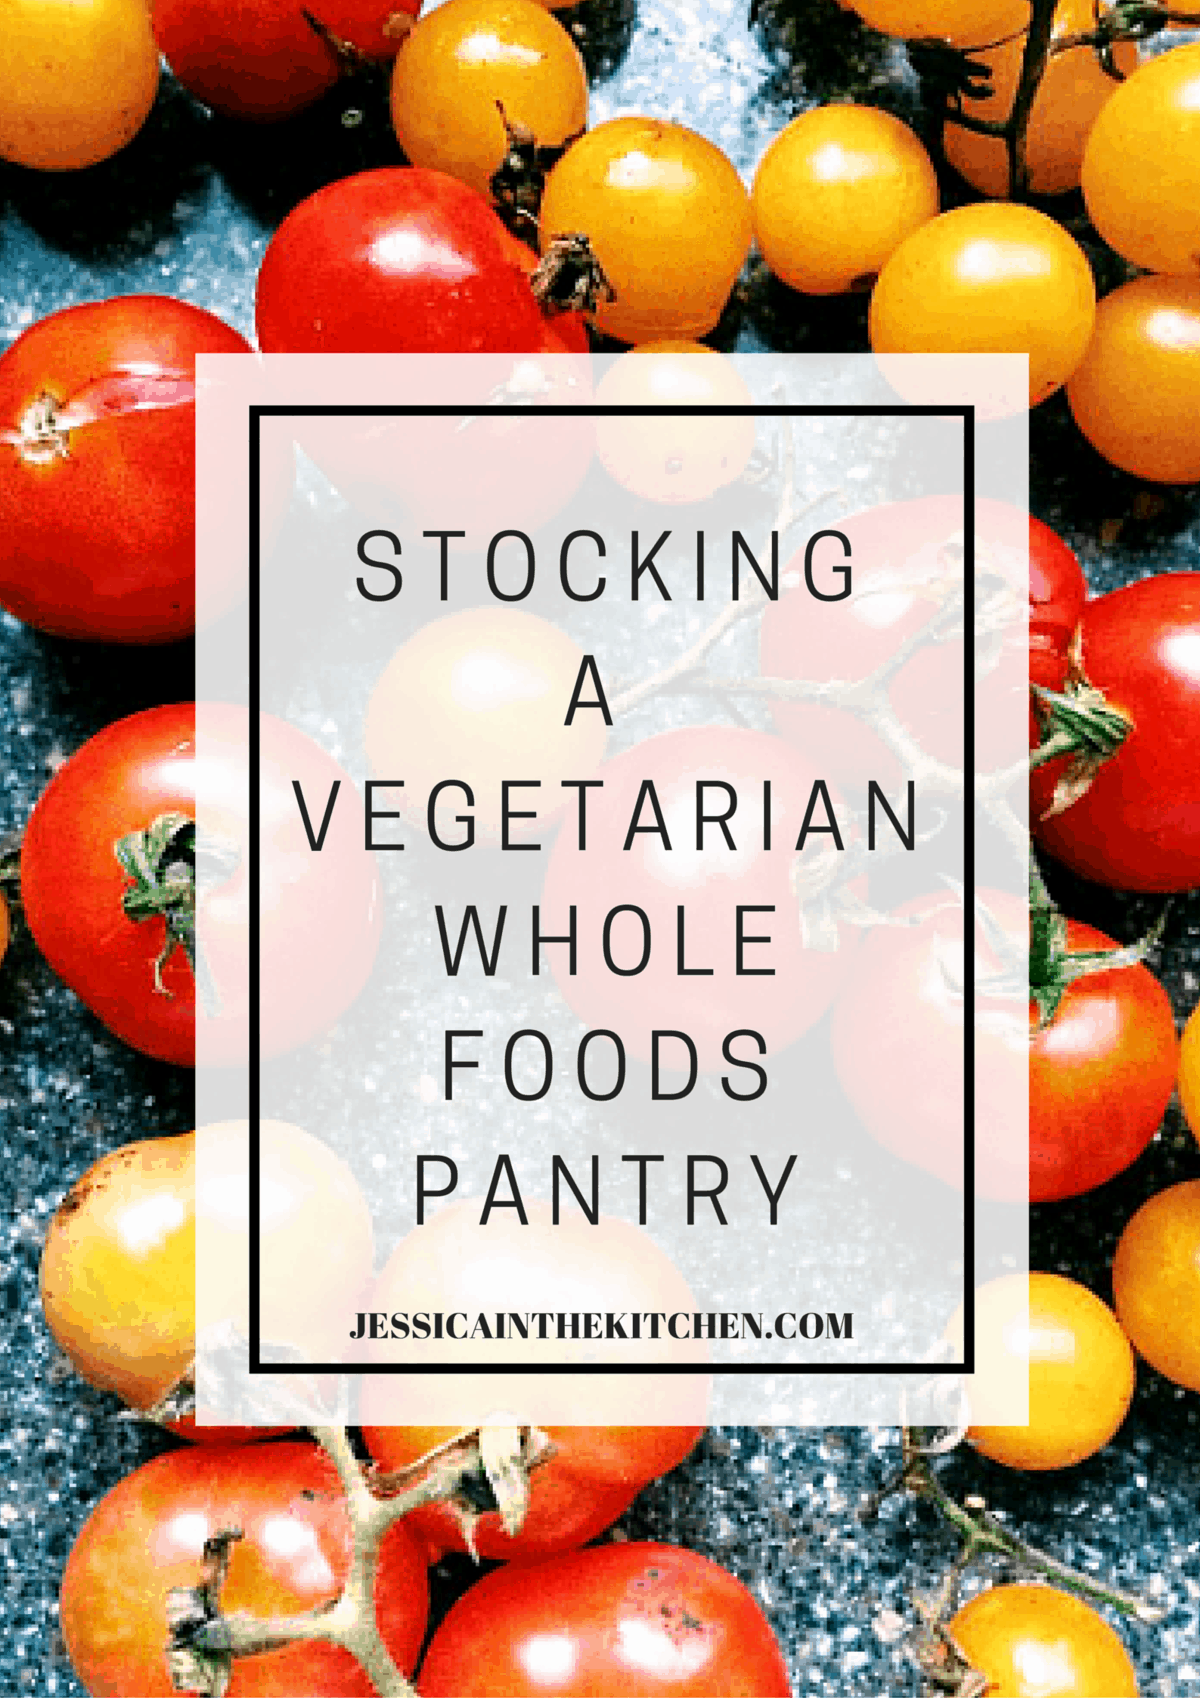 Stocking a Vegetarian Whole Foods Pantry title graphic.